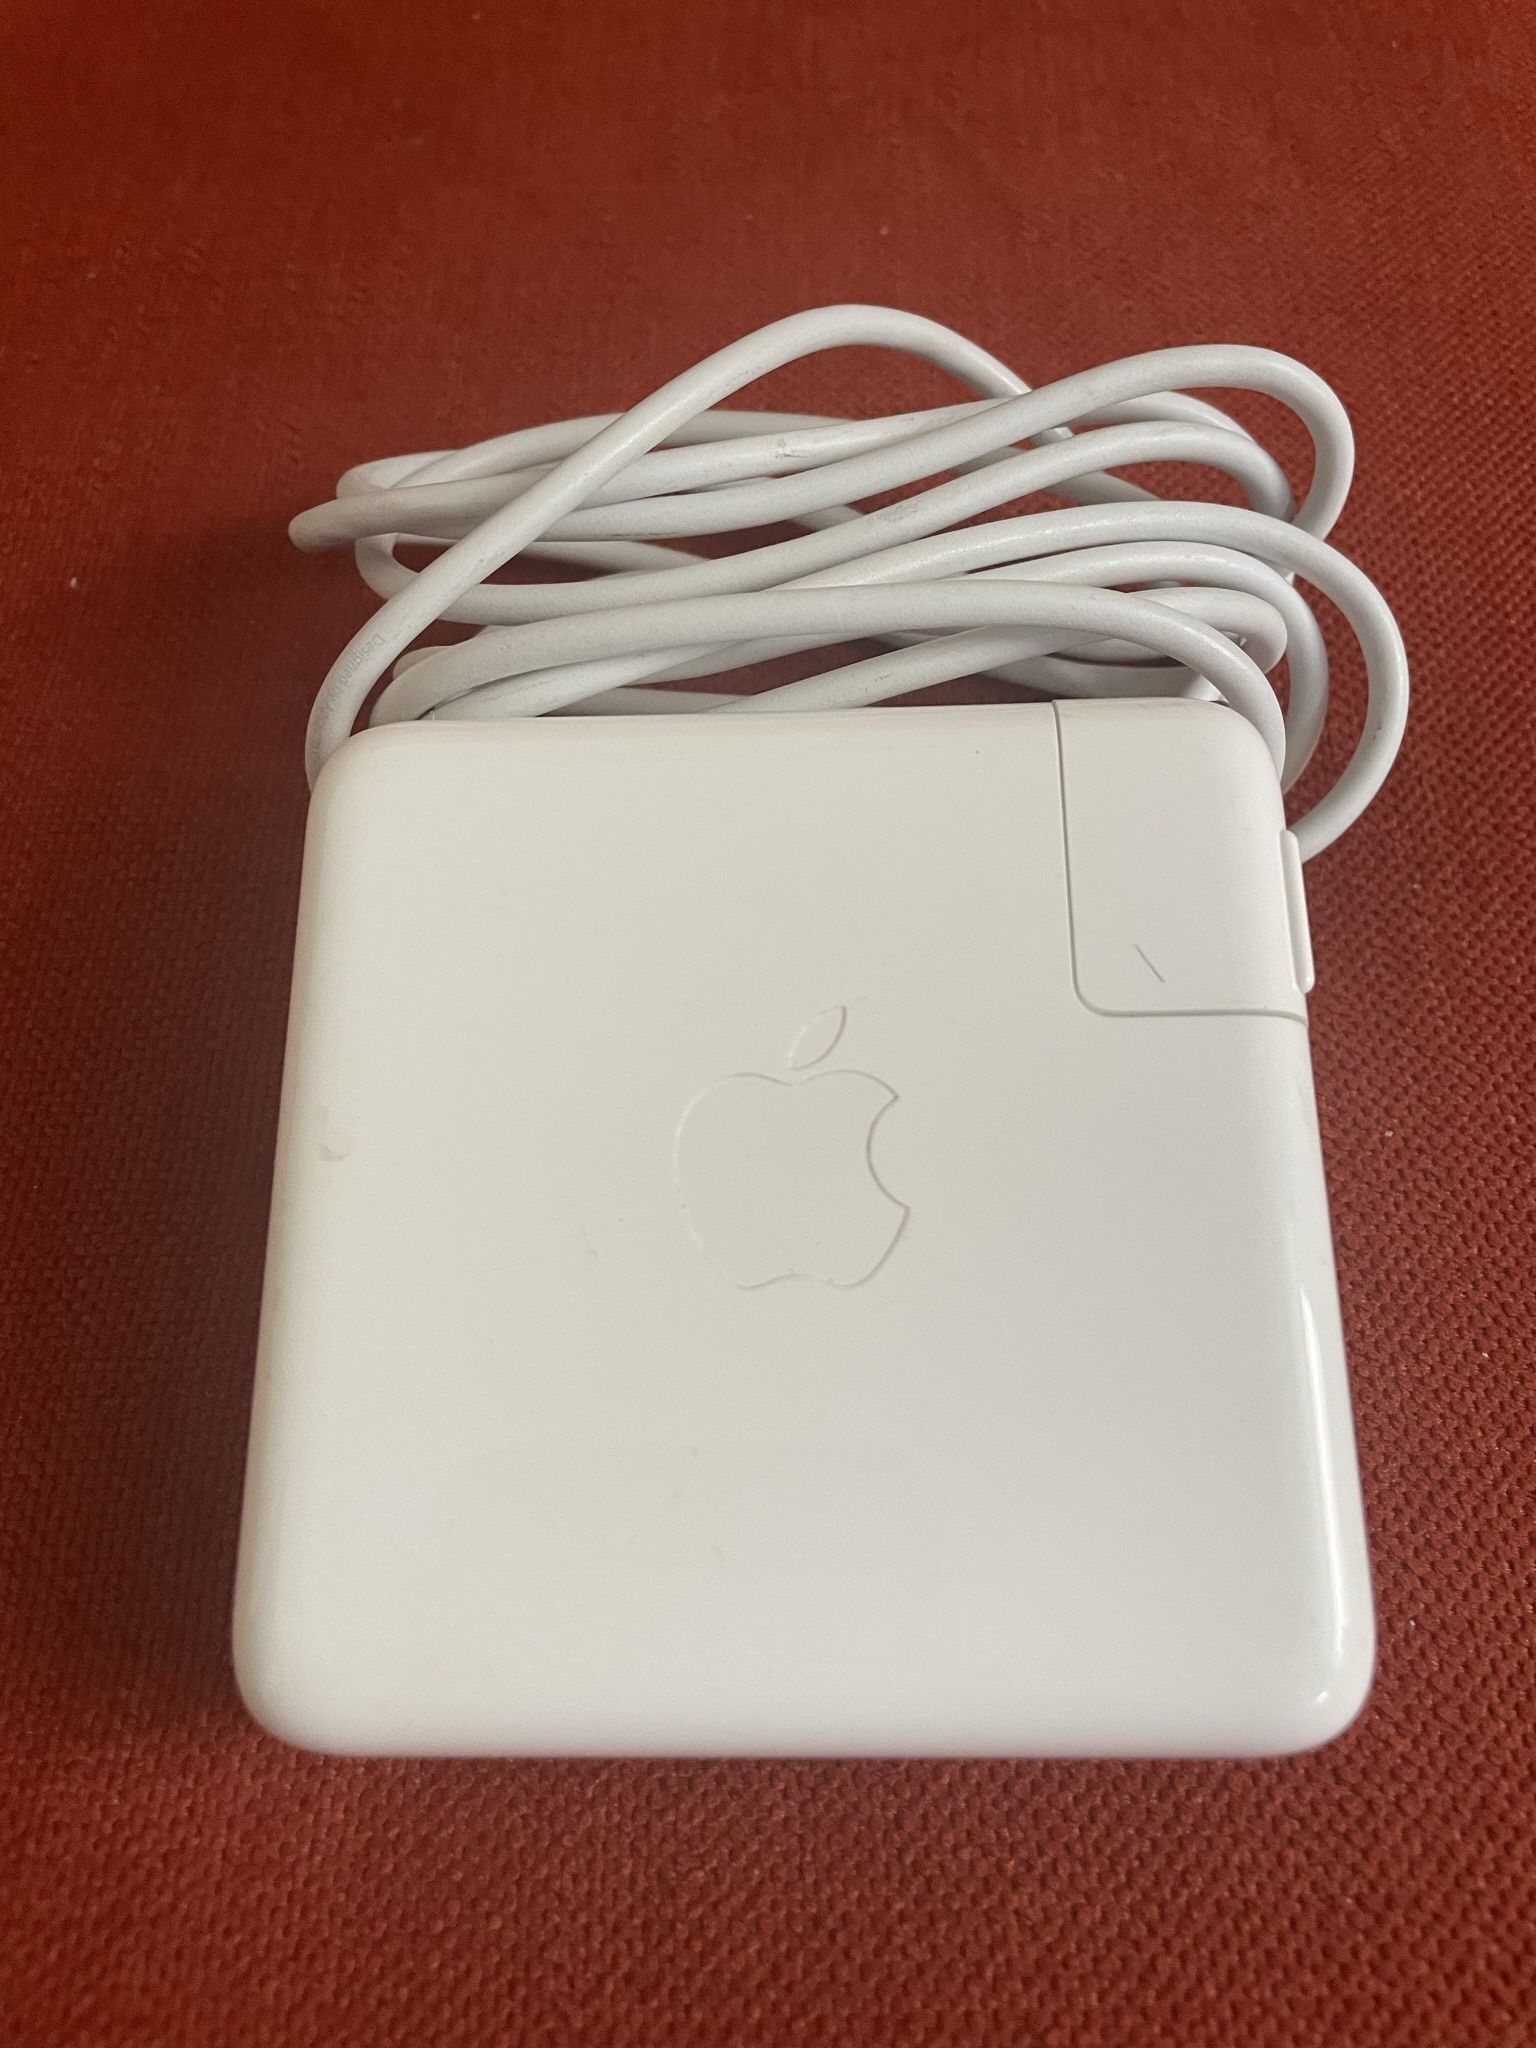 Apple Macbook Usb-c Charger, Power Adapter